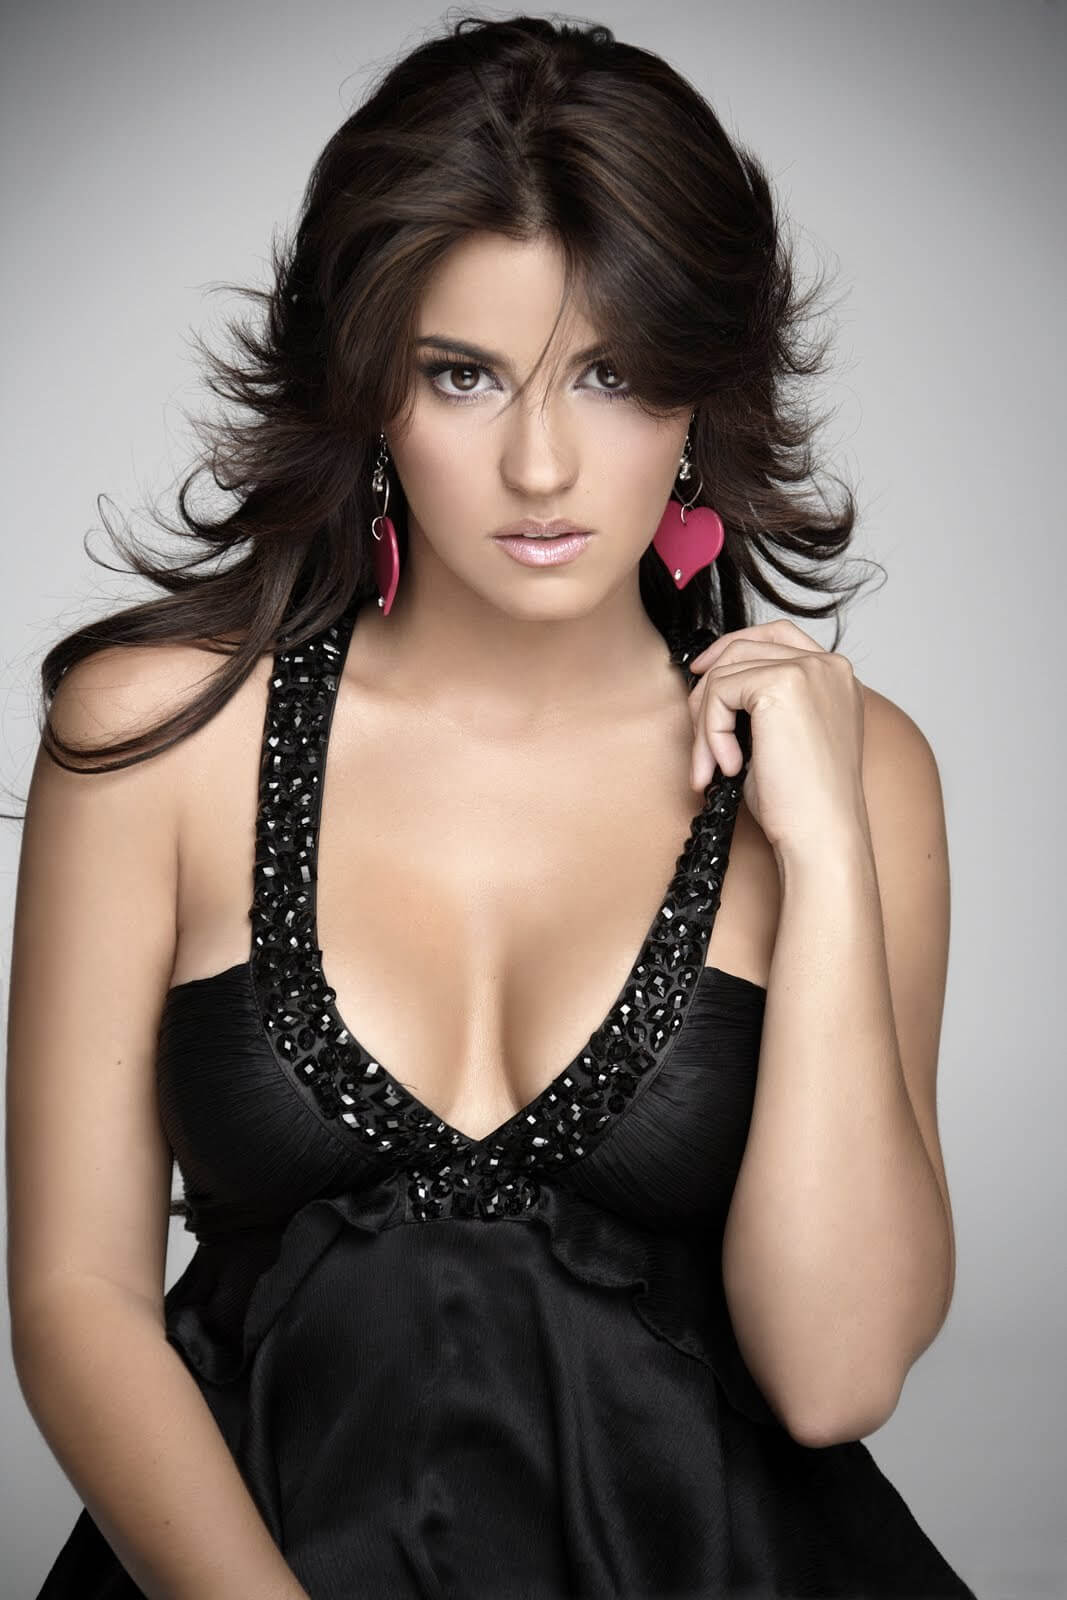 51 Maite Perroni Nude Pictures Can Leave You Flabbergasted 34